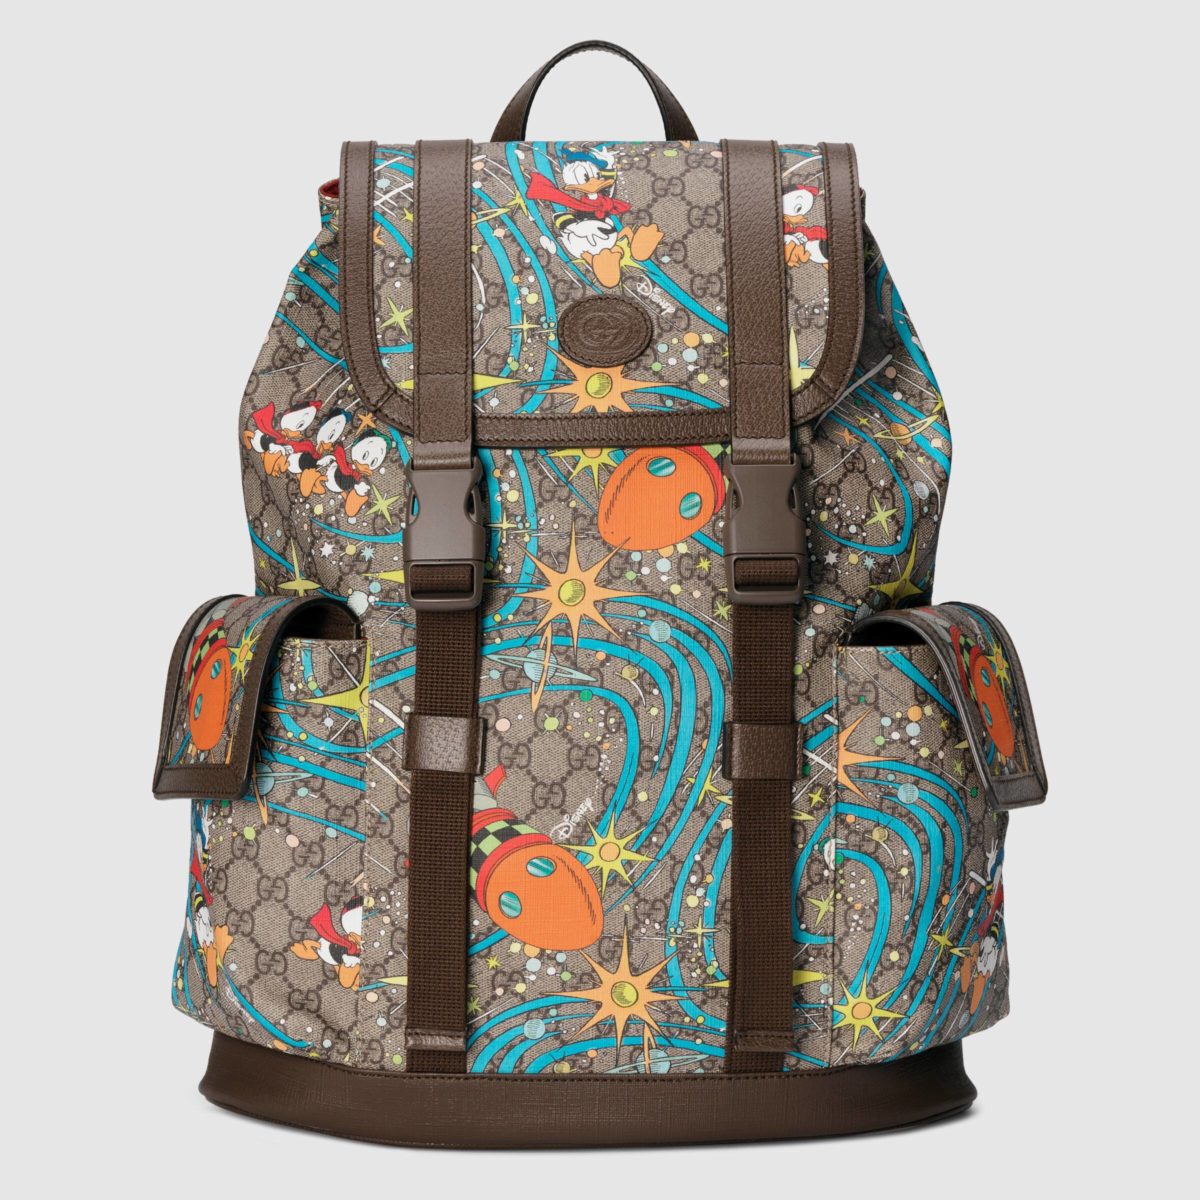 SHOP NEW Disney x Gucci Donald Duck Collection Now